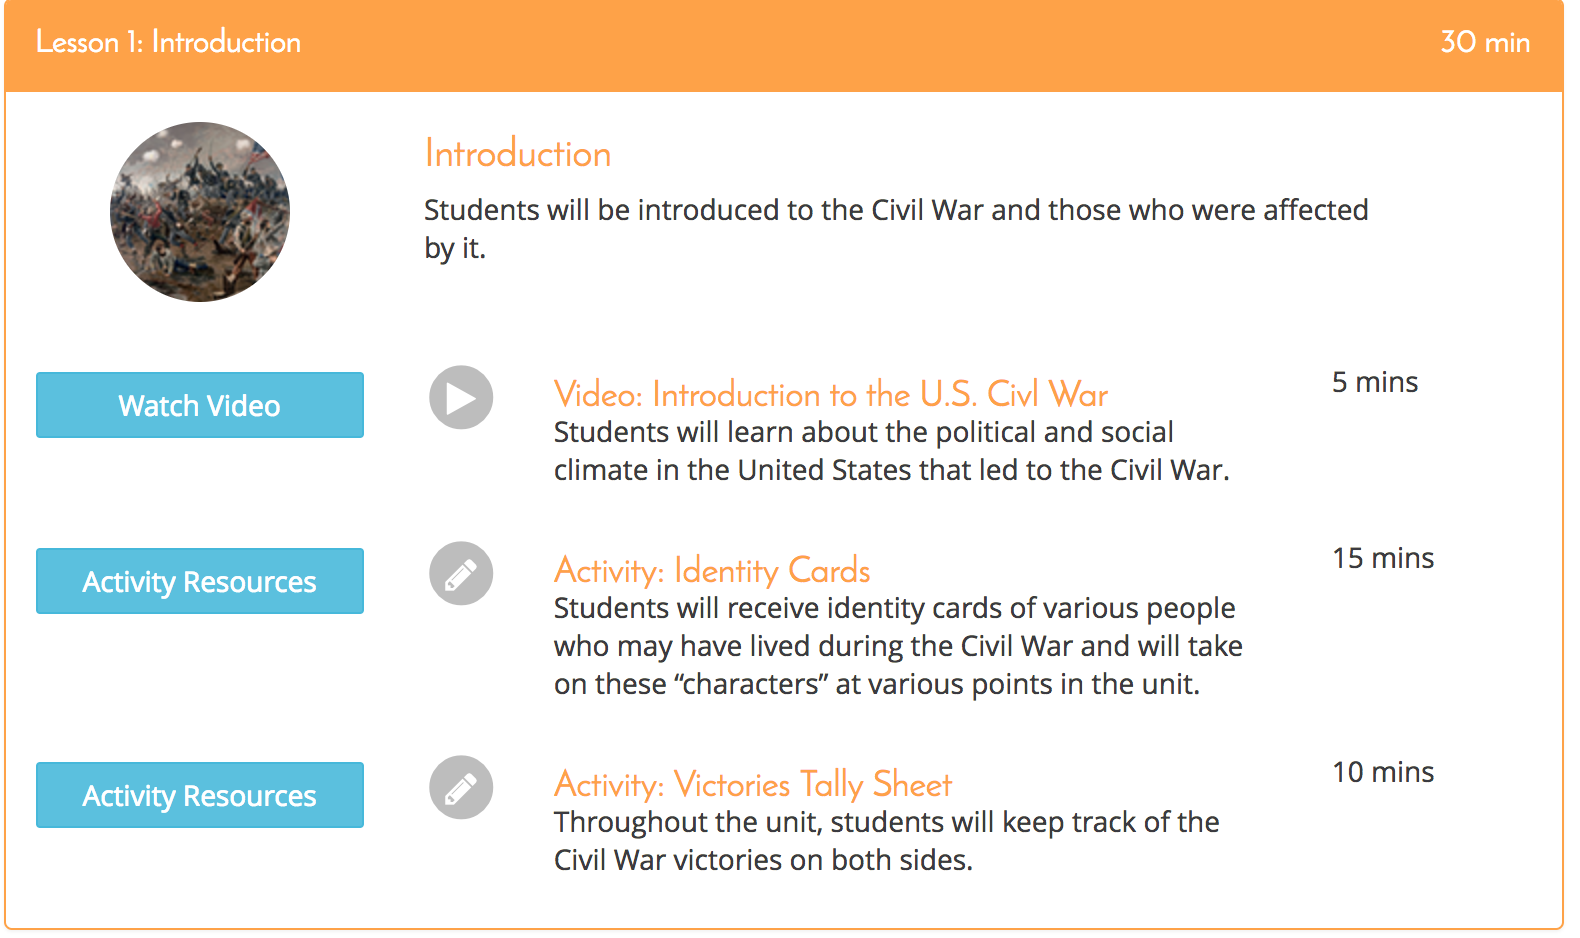 The introduction to a unit about the U.S. Civil War, with links to a video and activity resources.